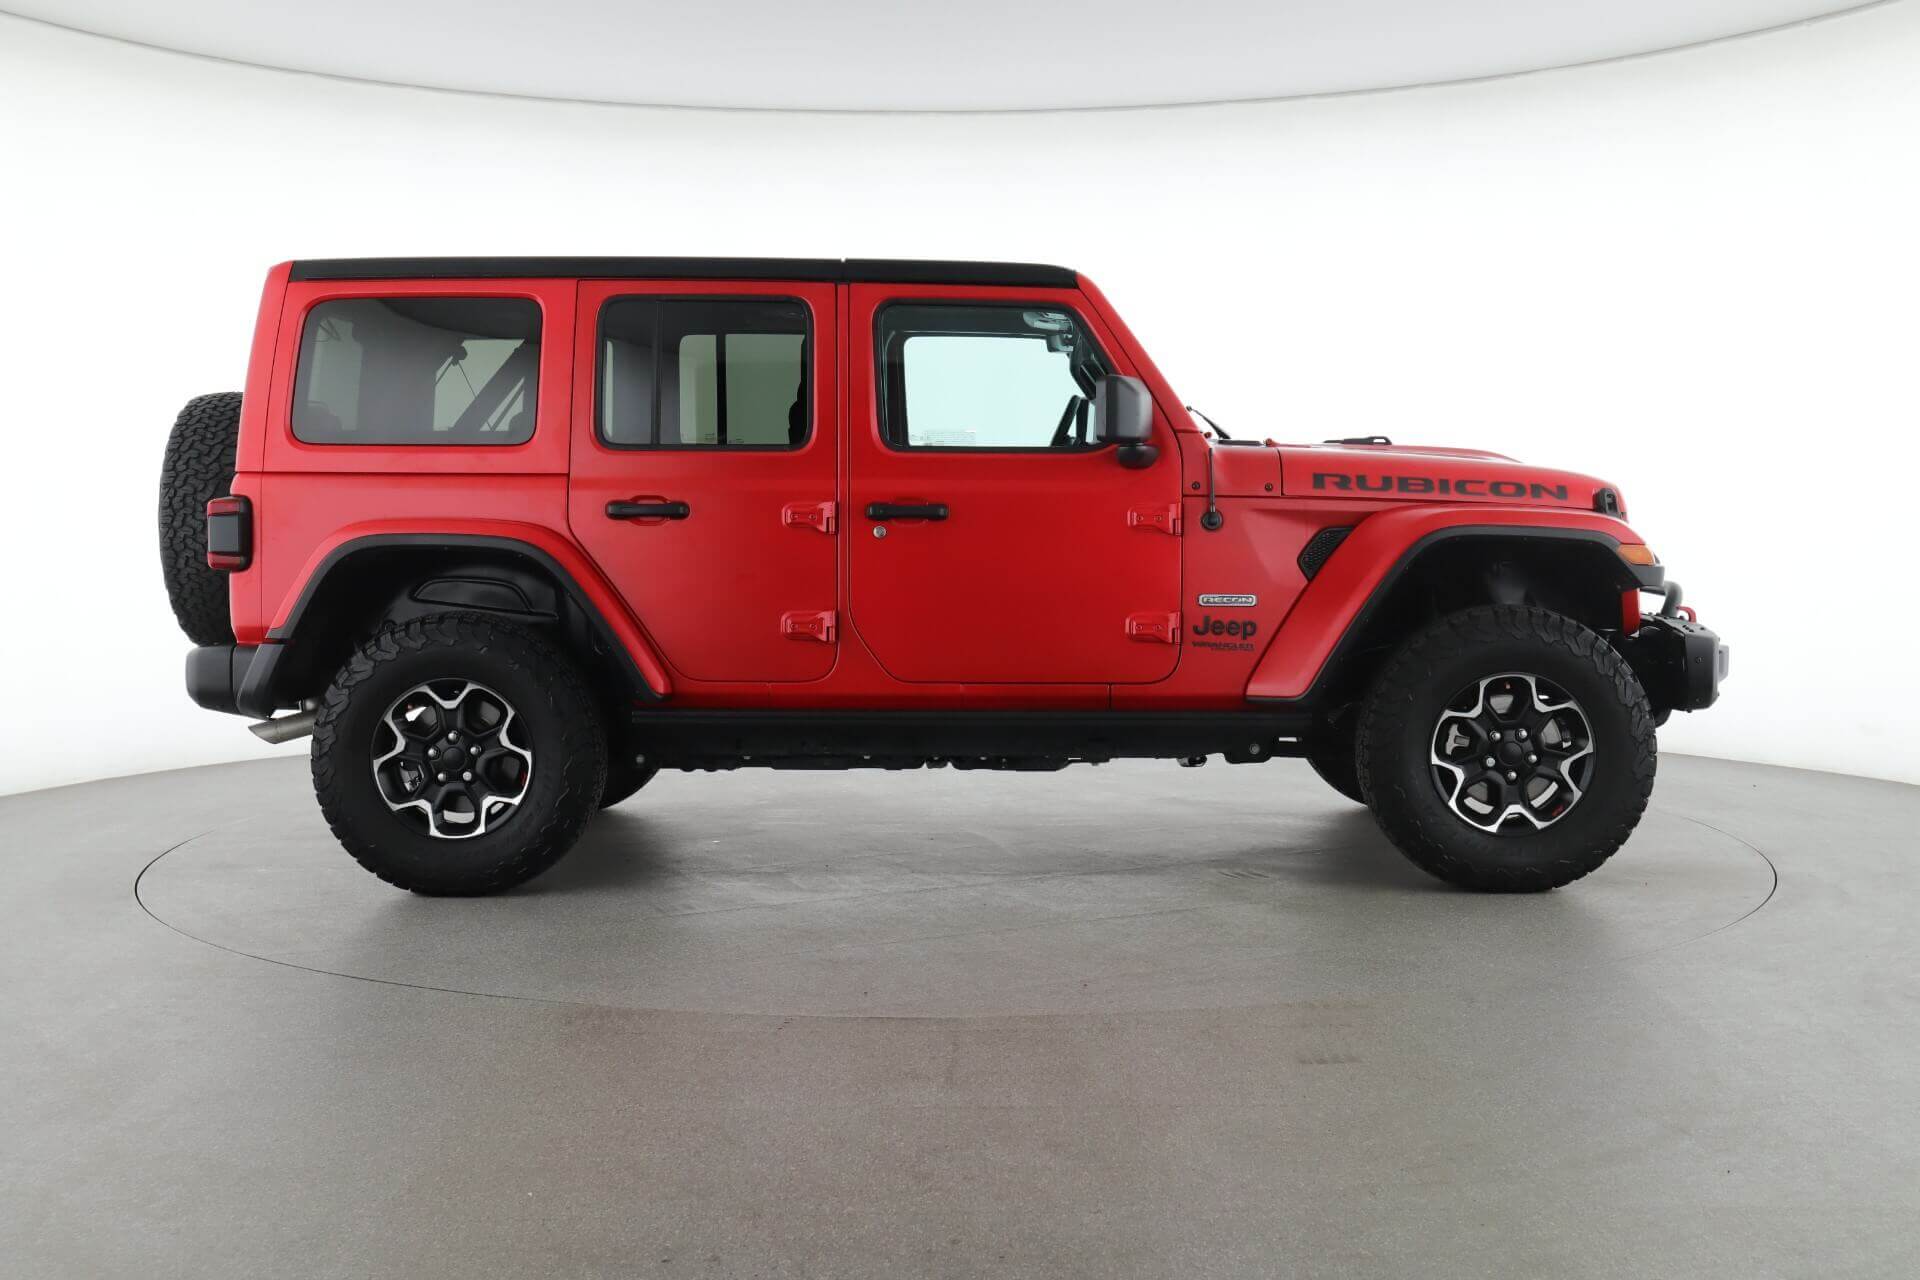 How Much Is a Jeep Wrangler Unlimited? Reviews & Specs | Shift